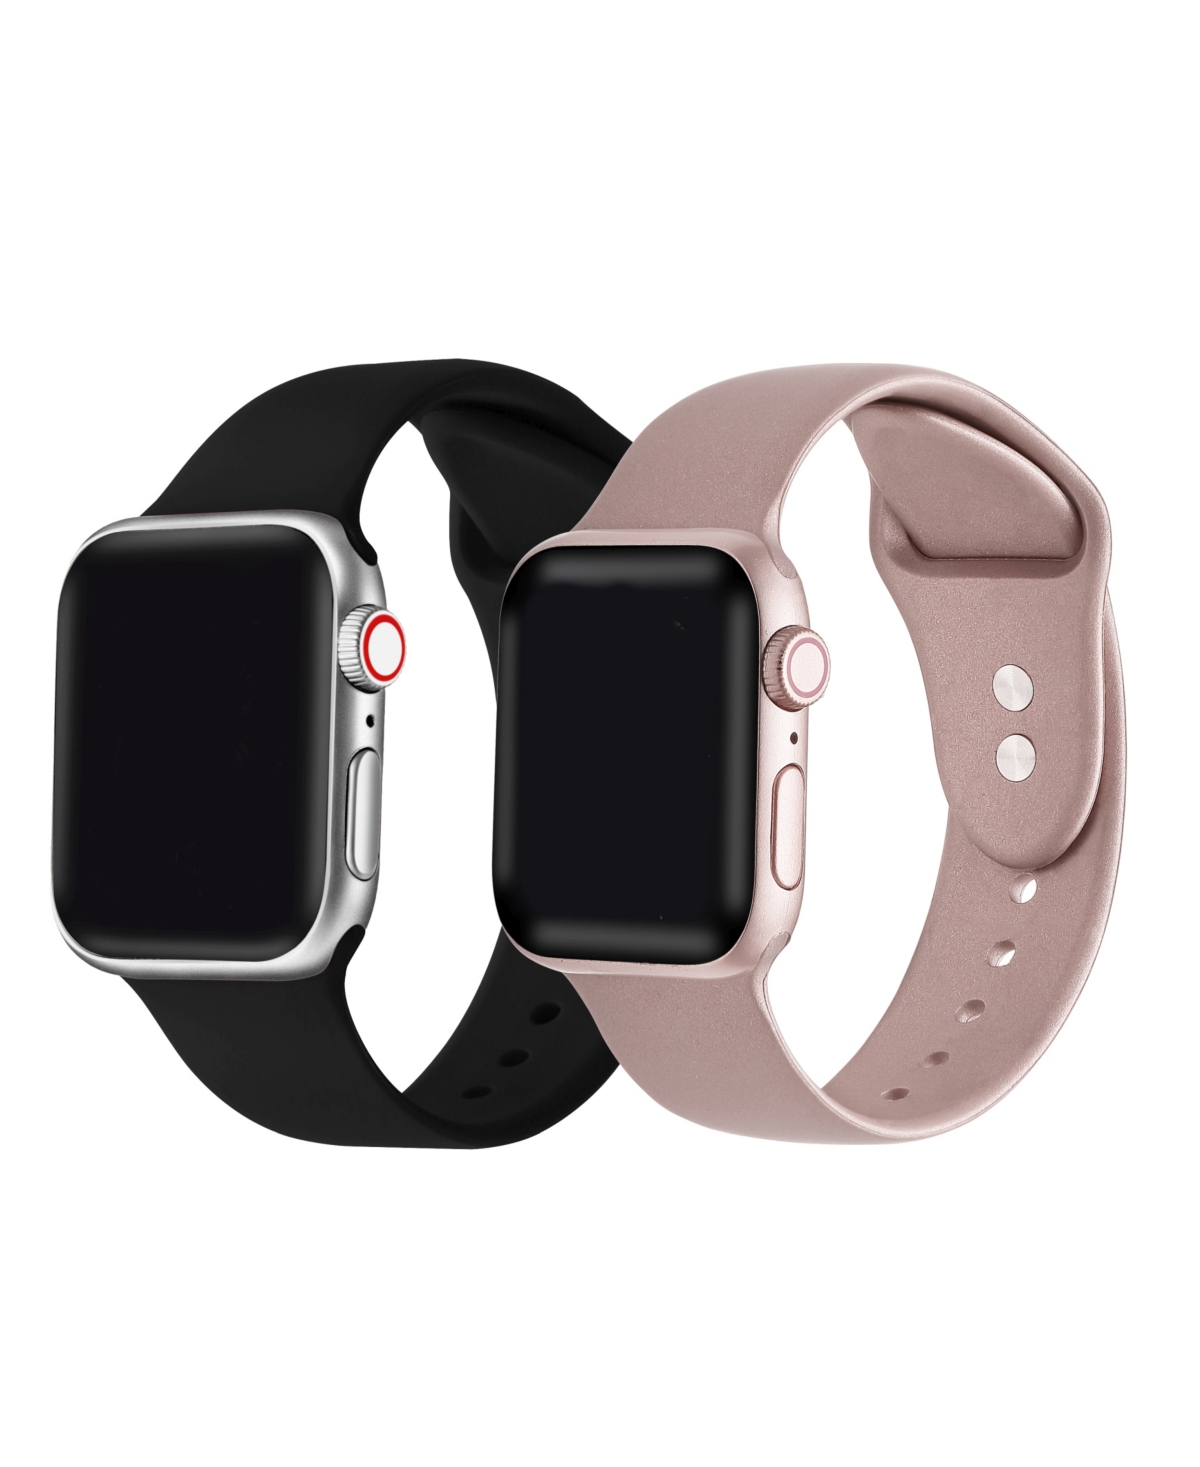 Men's and Women's Rose Gold Metallic 2 Piece Silicone Band for Apple Watch 42mm - Multi